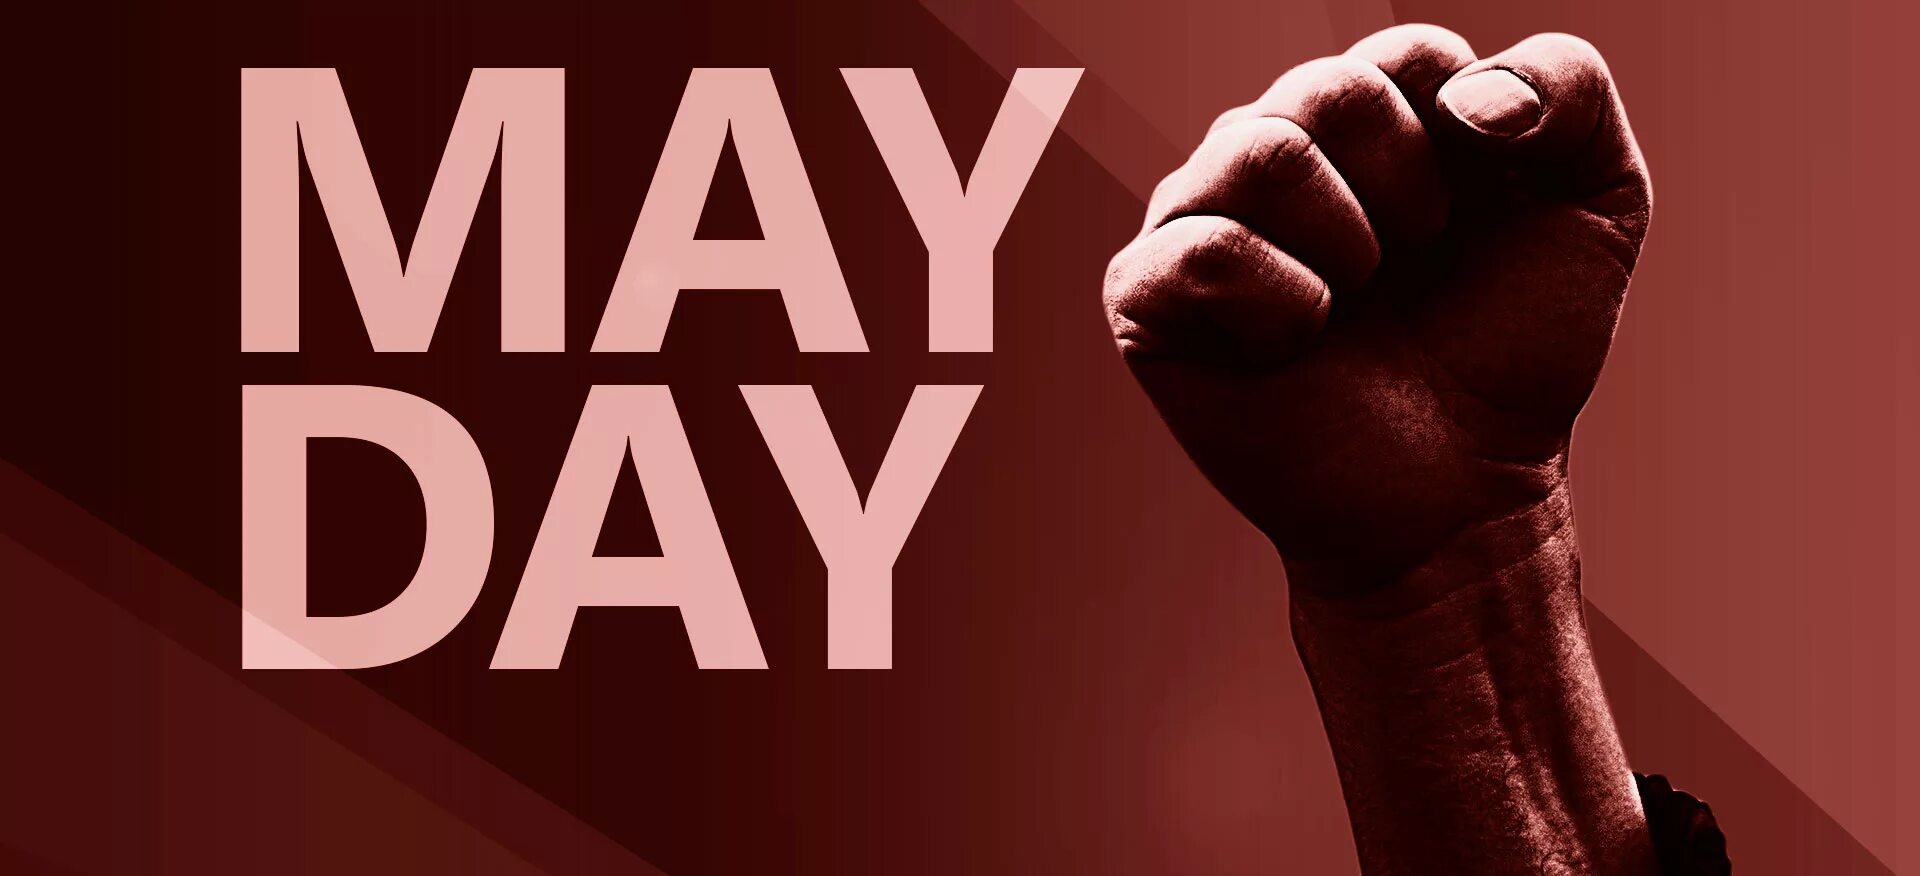 May day when. May Day. Лабор дей. 1 May Day. Мэй Дэй картинки.